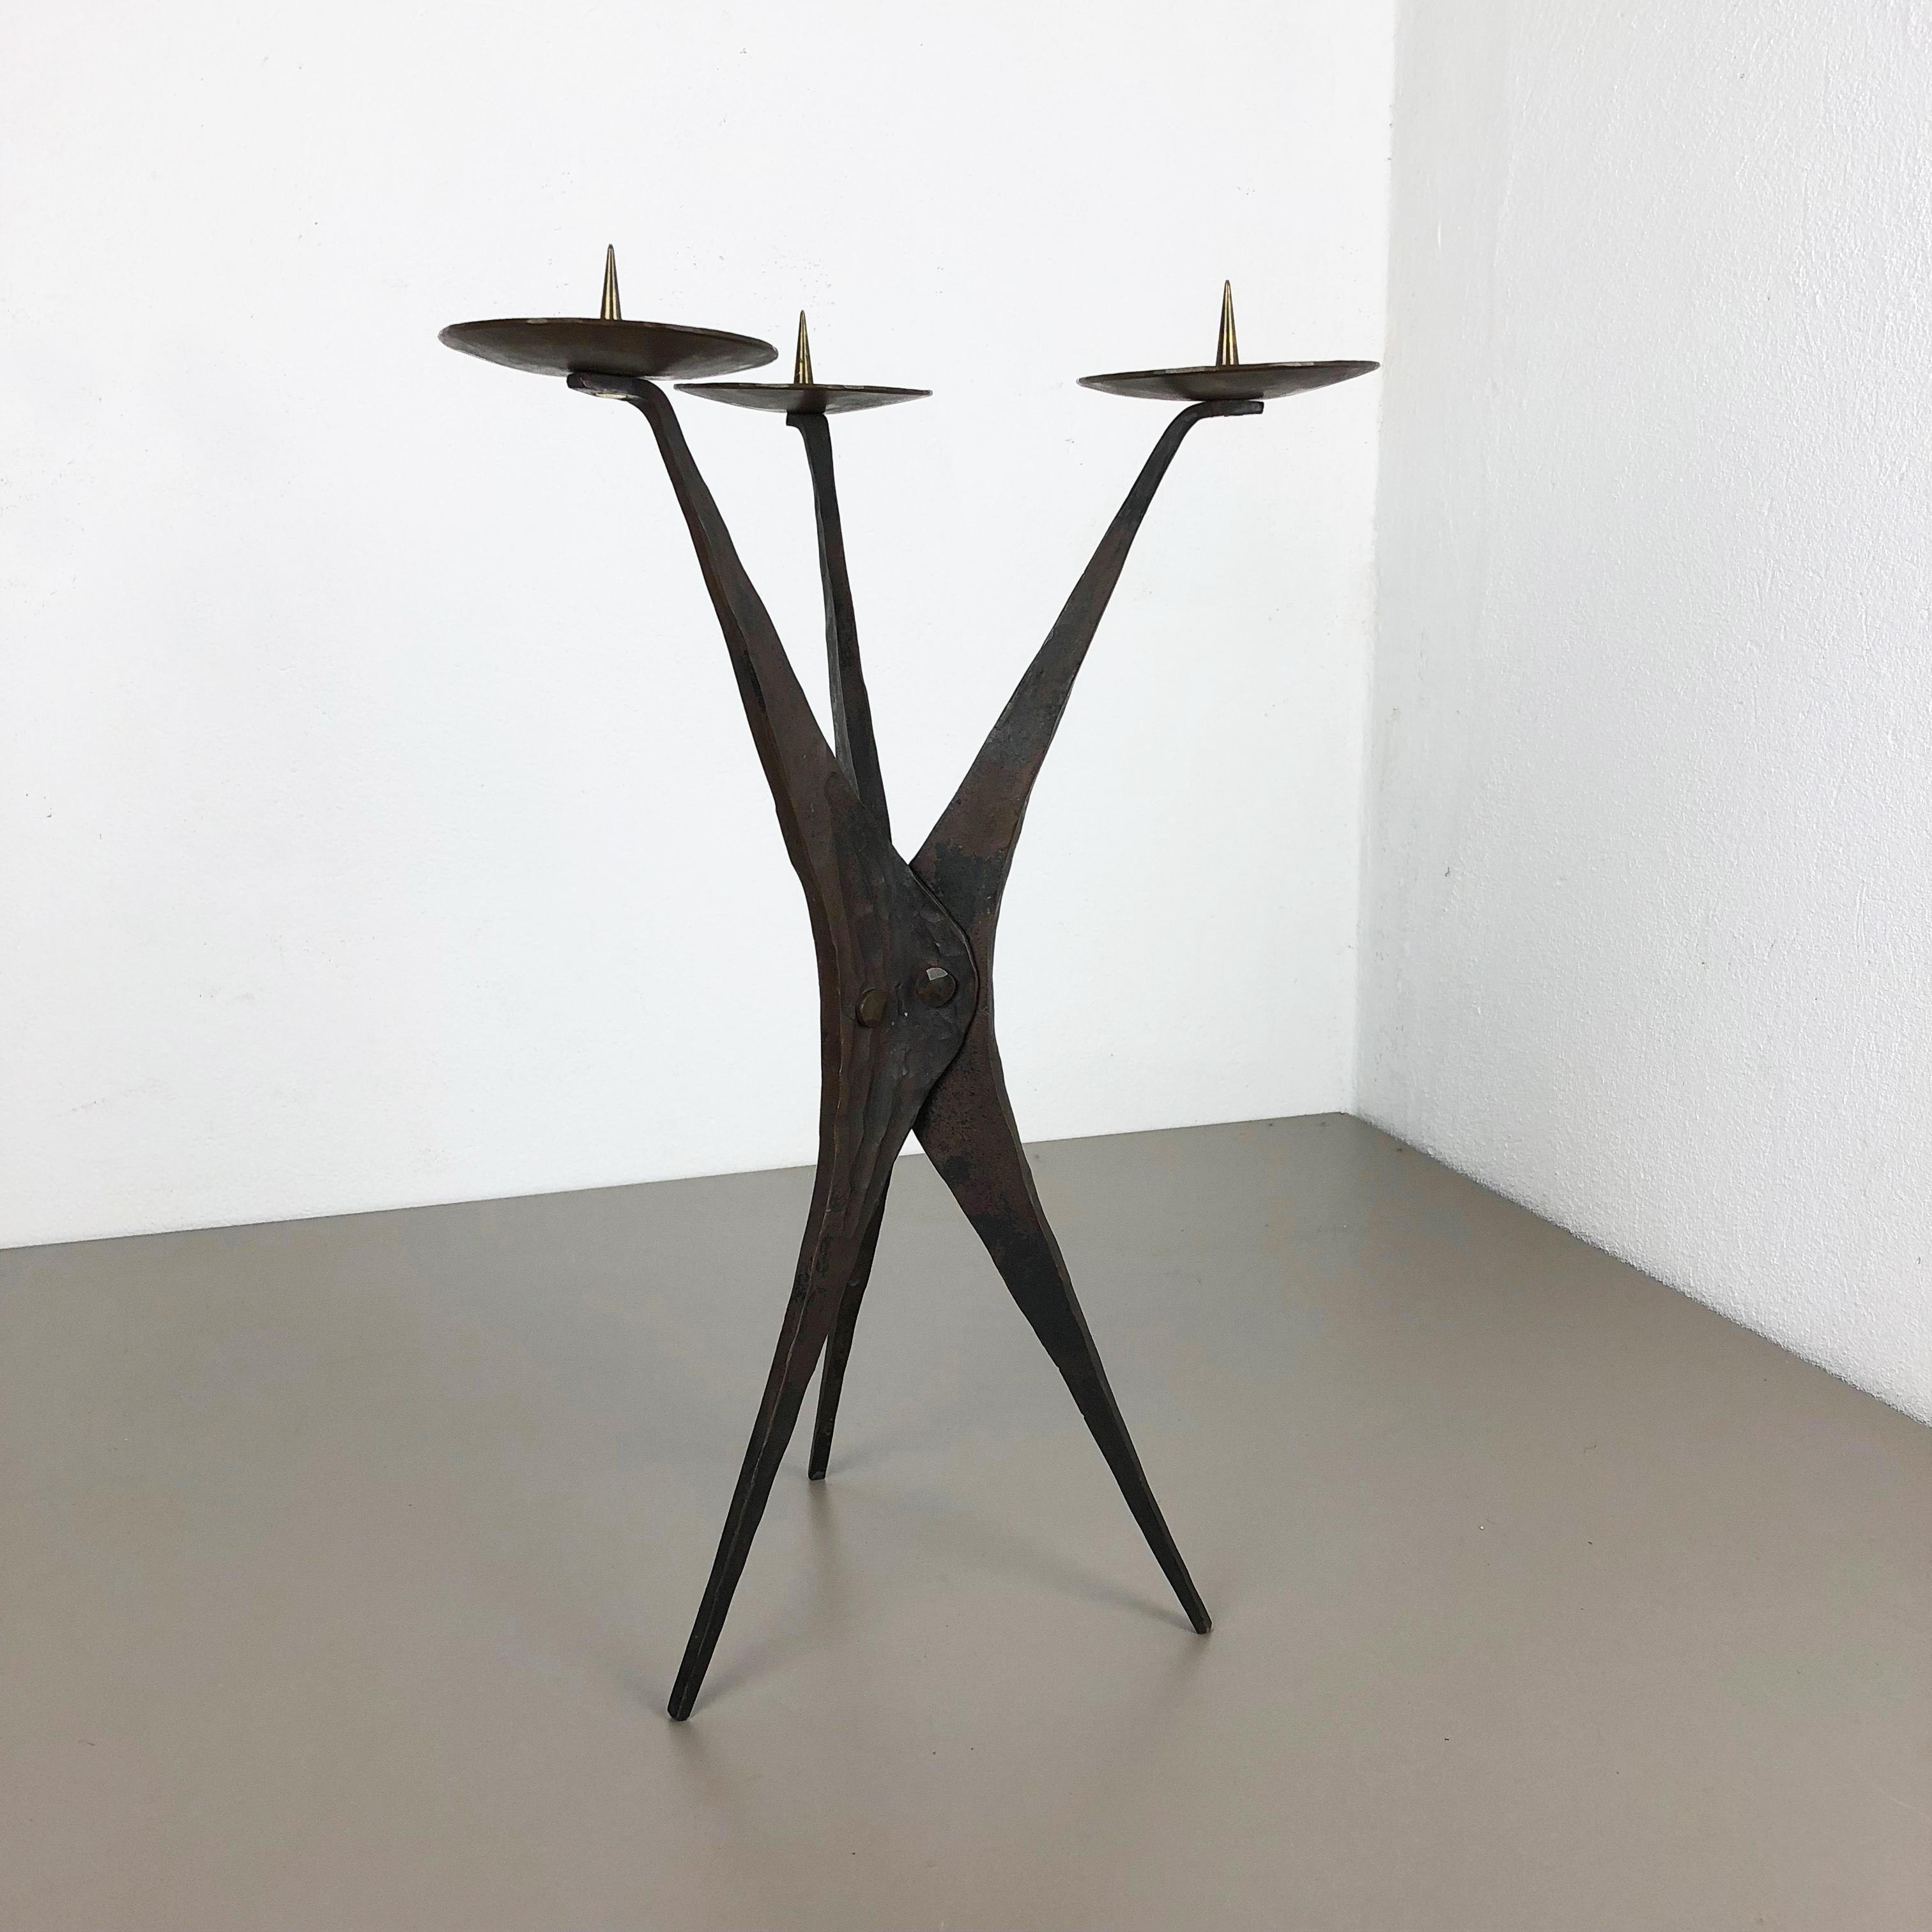 Article: Brutalist tripod candleholder

Origin: Austria

Material: Solid copper

Decade: 1950s

Description: This original vintage candleholder, was produced in the 1950s in Austria. it is made of solid copper, and has a lovely patination due to the